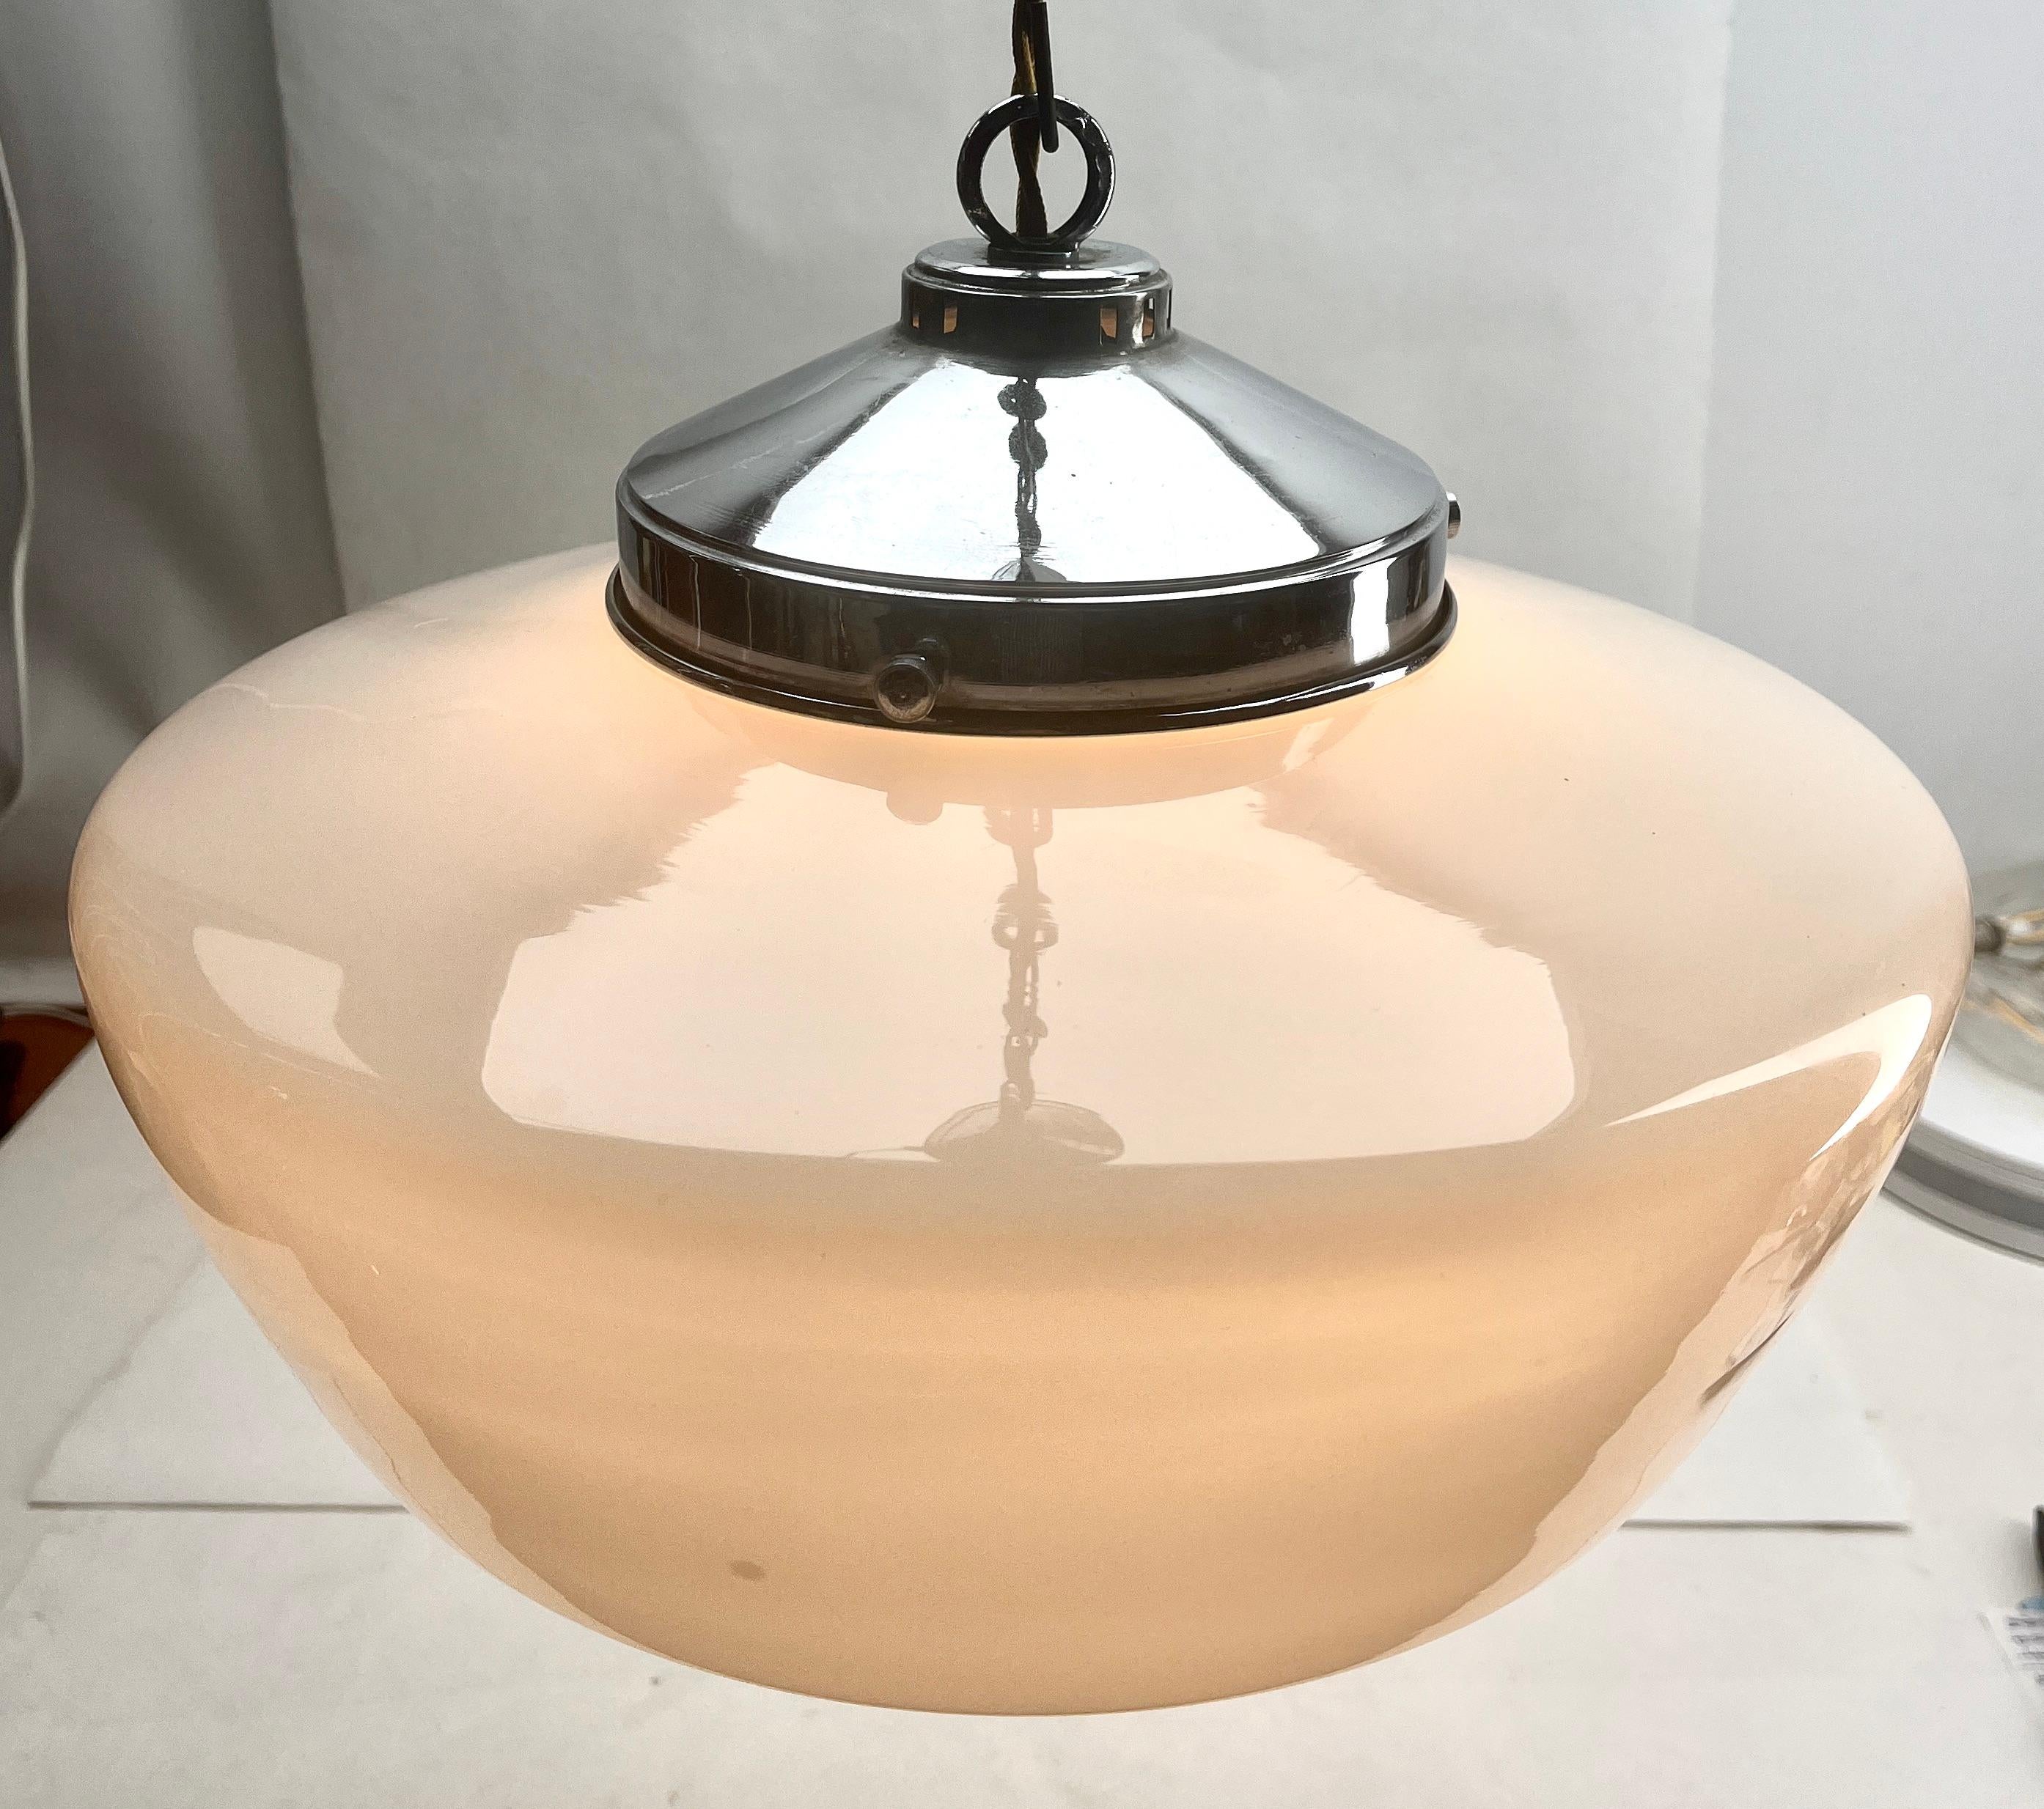 Phillips Pendant Lamp with a Opaline Shade and Chrome Fittings, 1930s, Holland For Sale 3